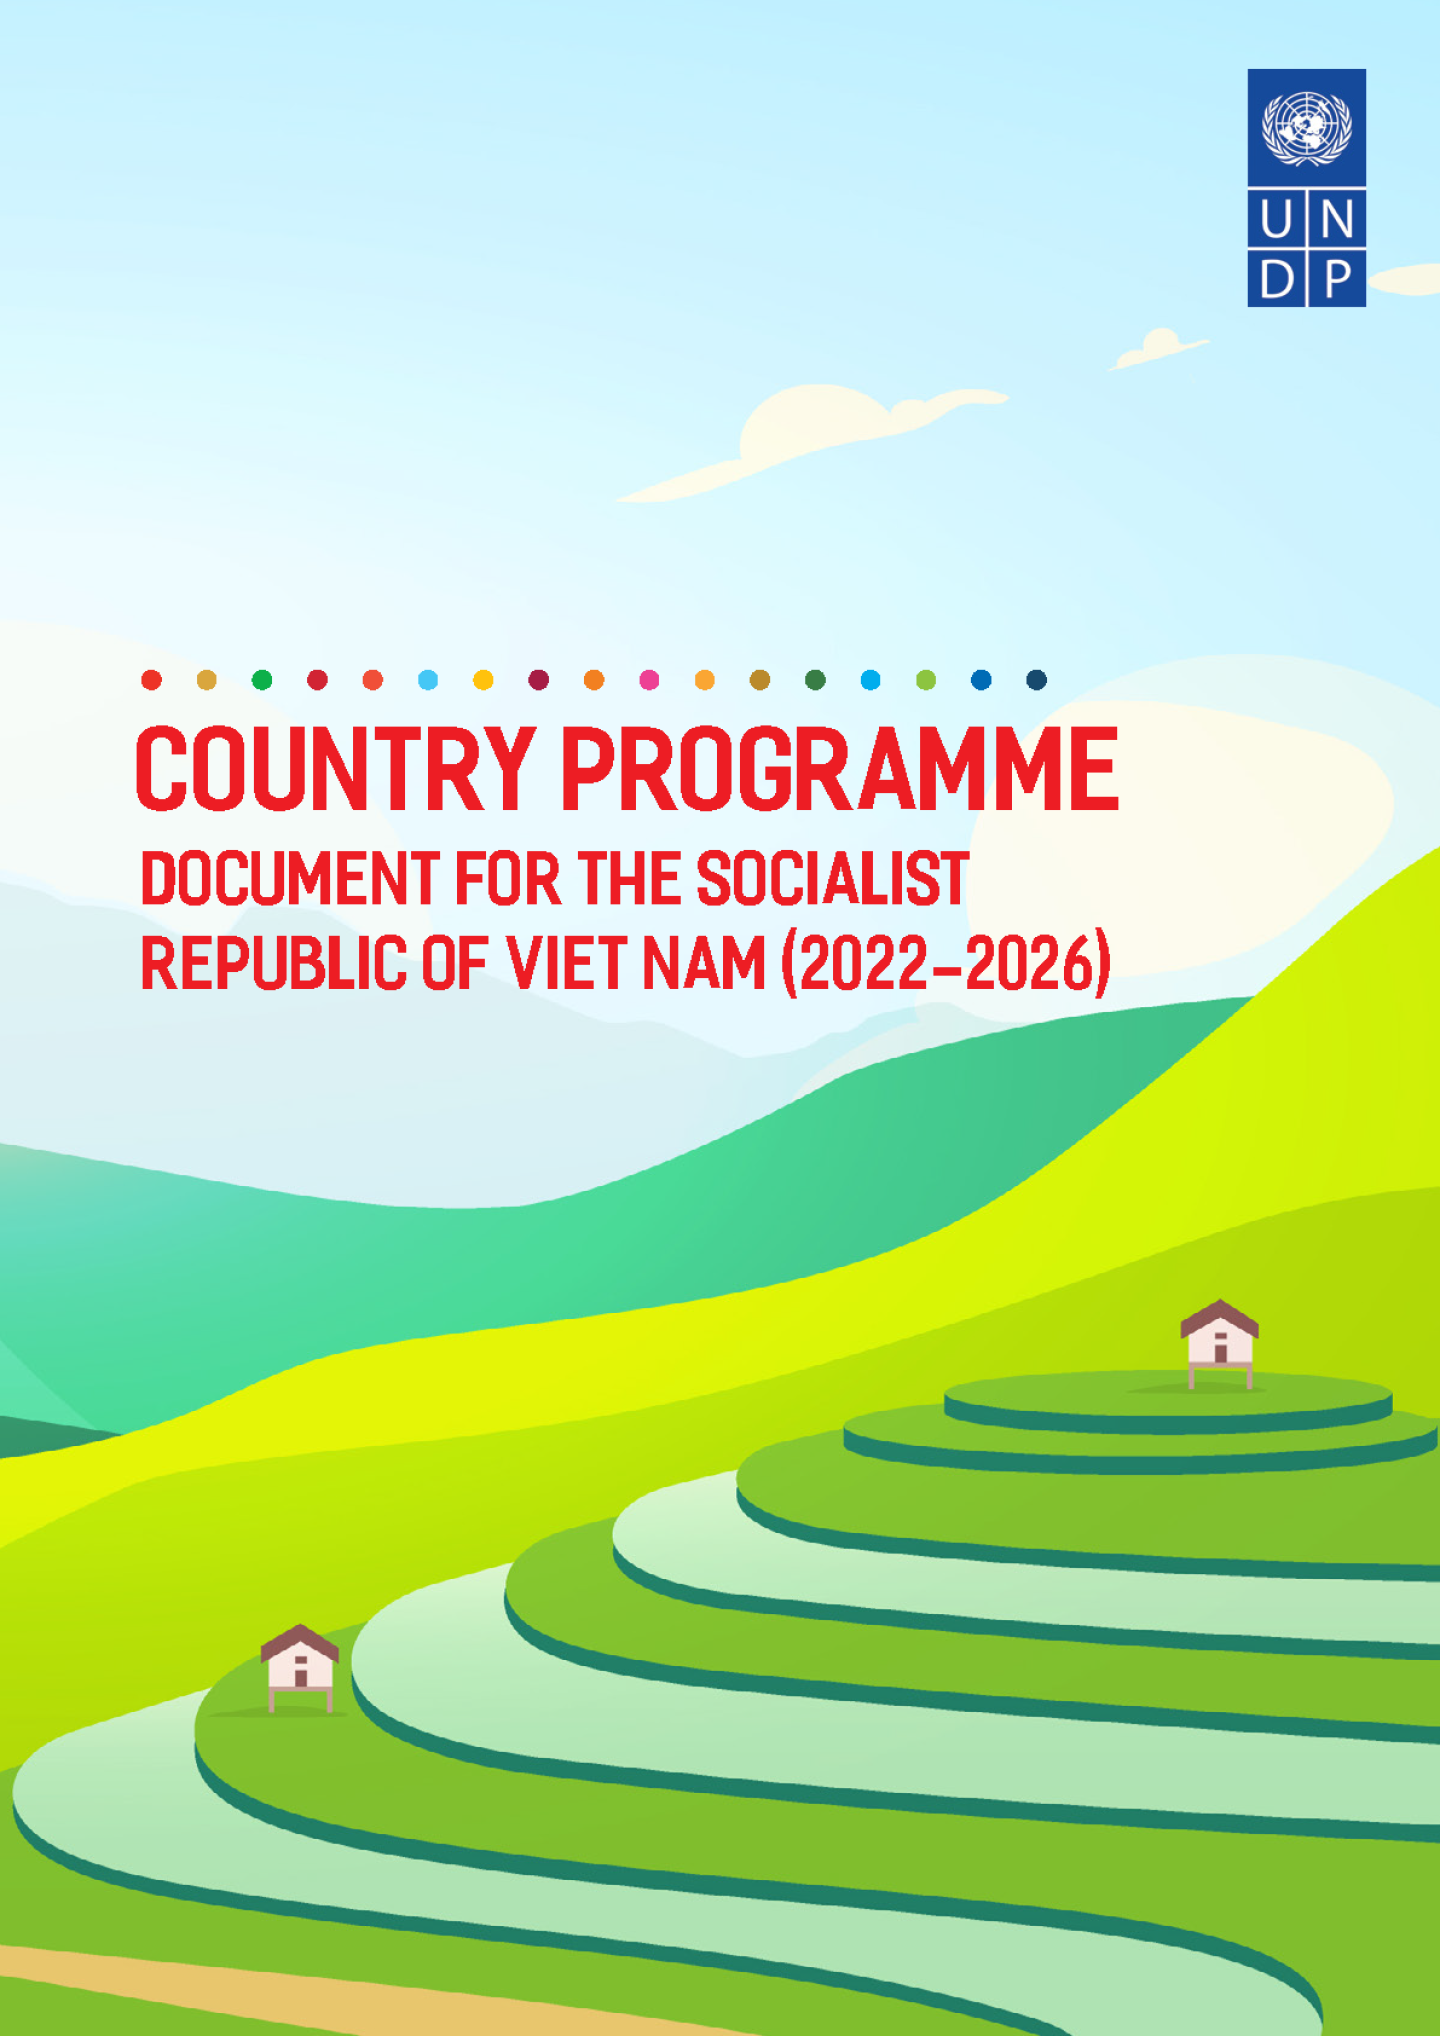 Country programme document for Viet Nam (2022-2026)